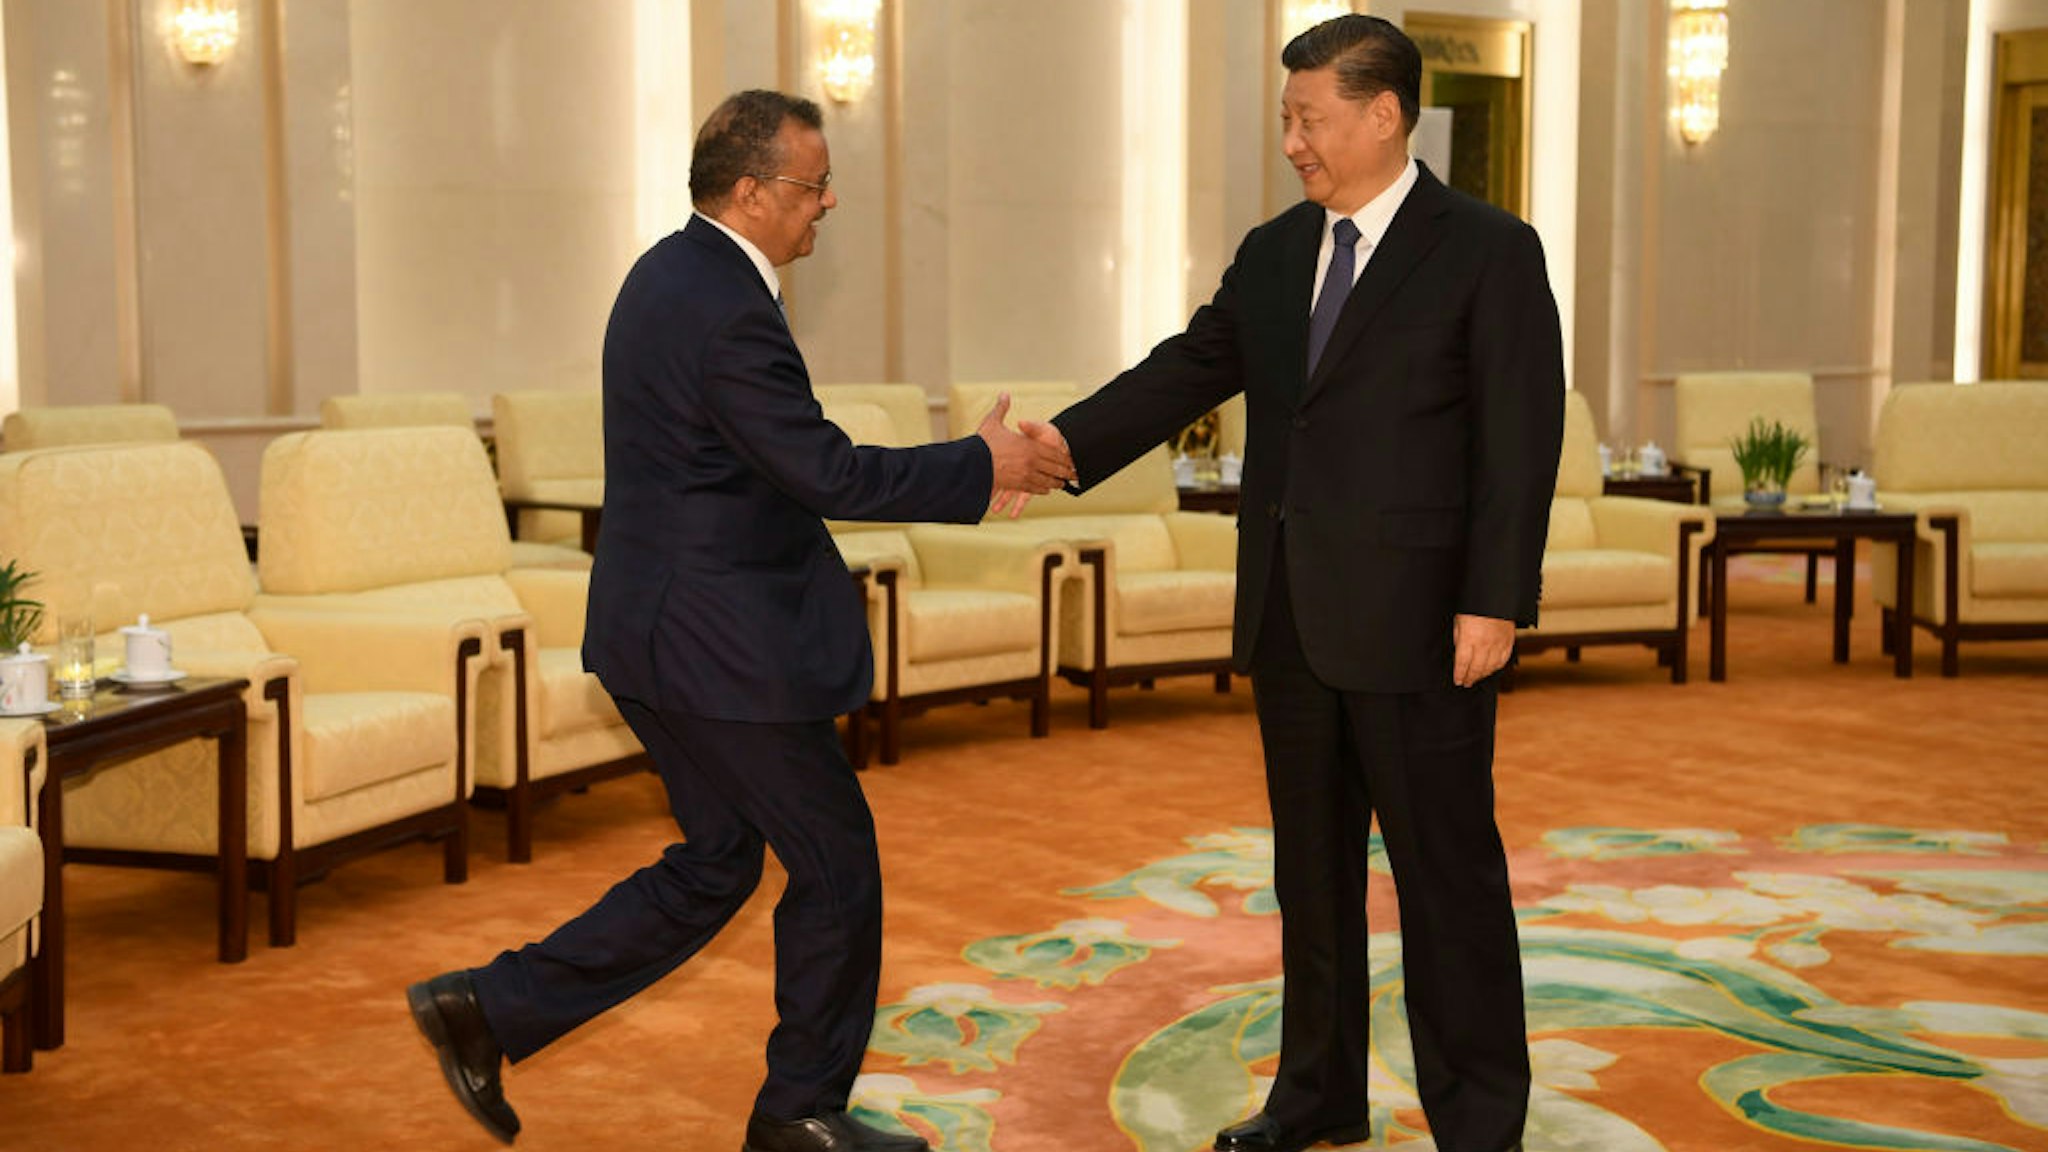 World Health Organization director general Tedros Adhanom (L) shakes hands with Chinese President Xi jinping before a meeting at the Great Hall of the People in Beijing on January 28, 2020. -